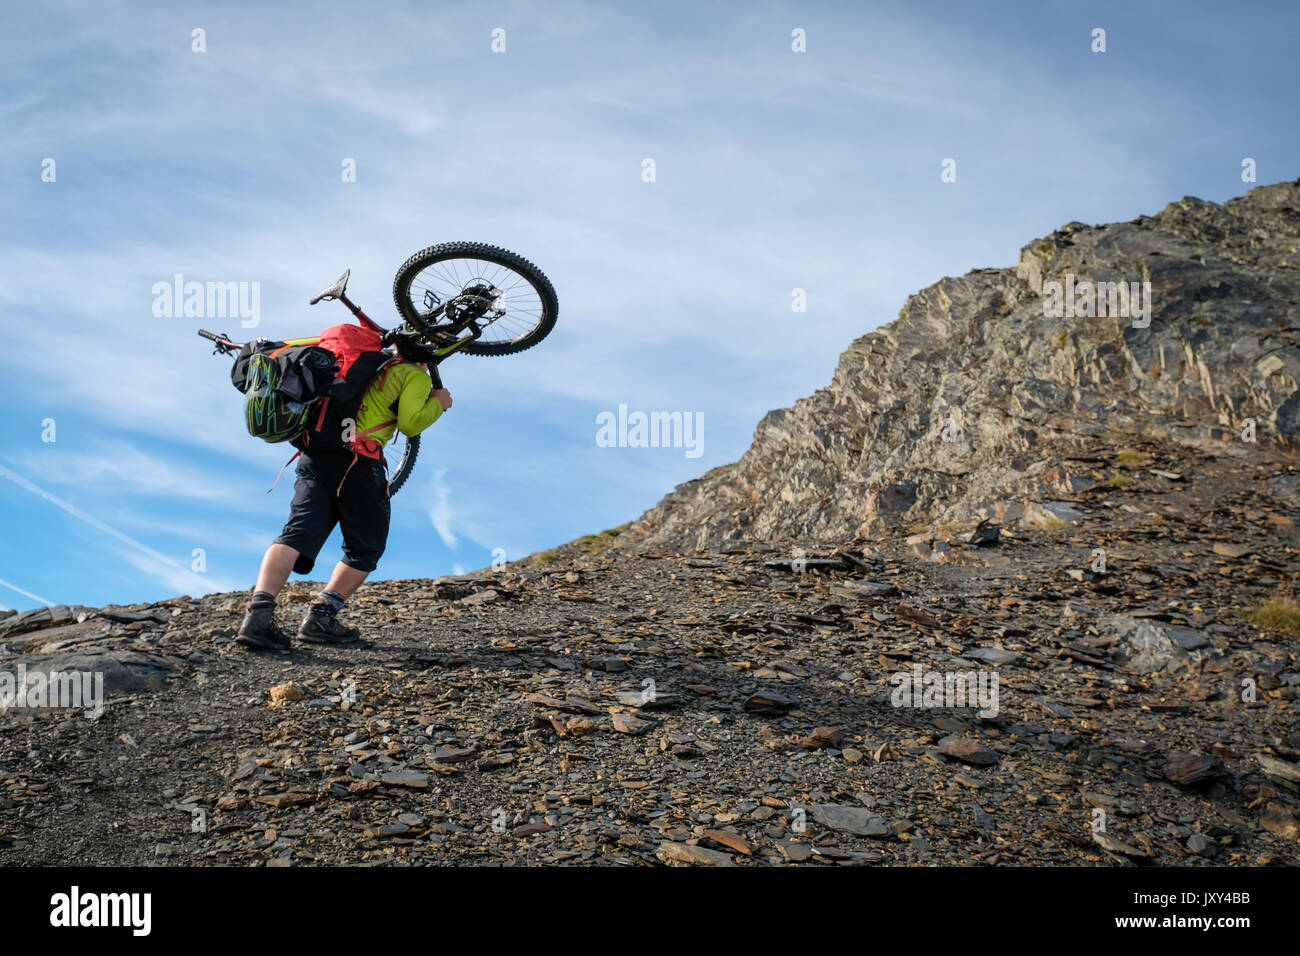 In french pyrenees (south of France), Alexis Righetti, adrenaline seeker and very talented biker, ride the mountain in an extreme way. Aragnouer - Fra Stock Photo